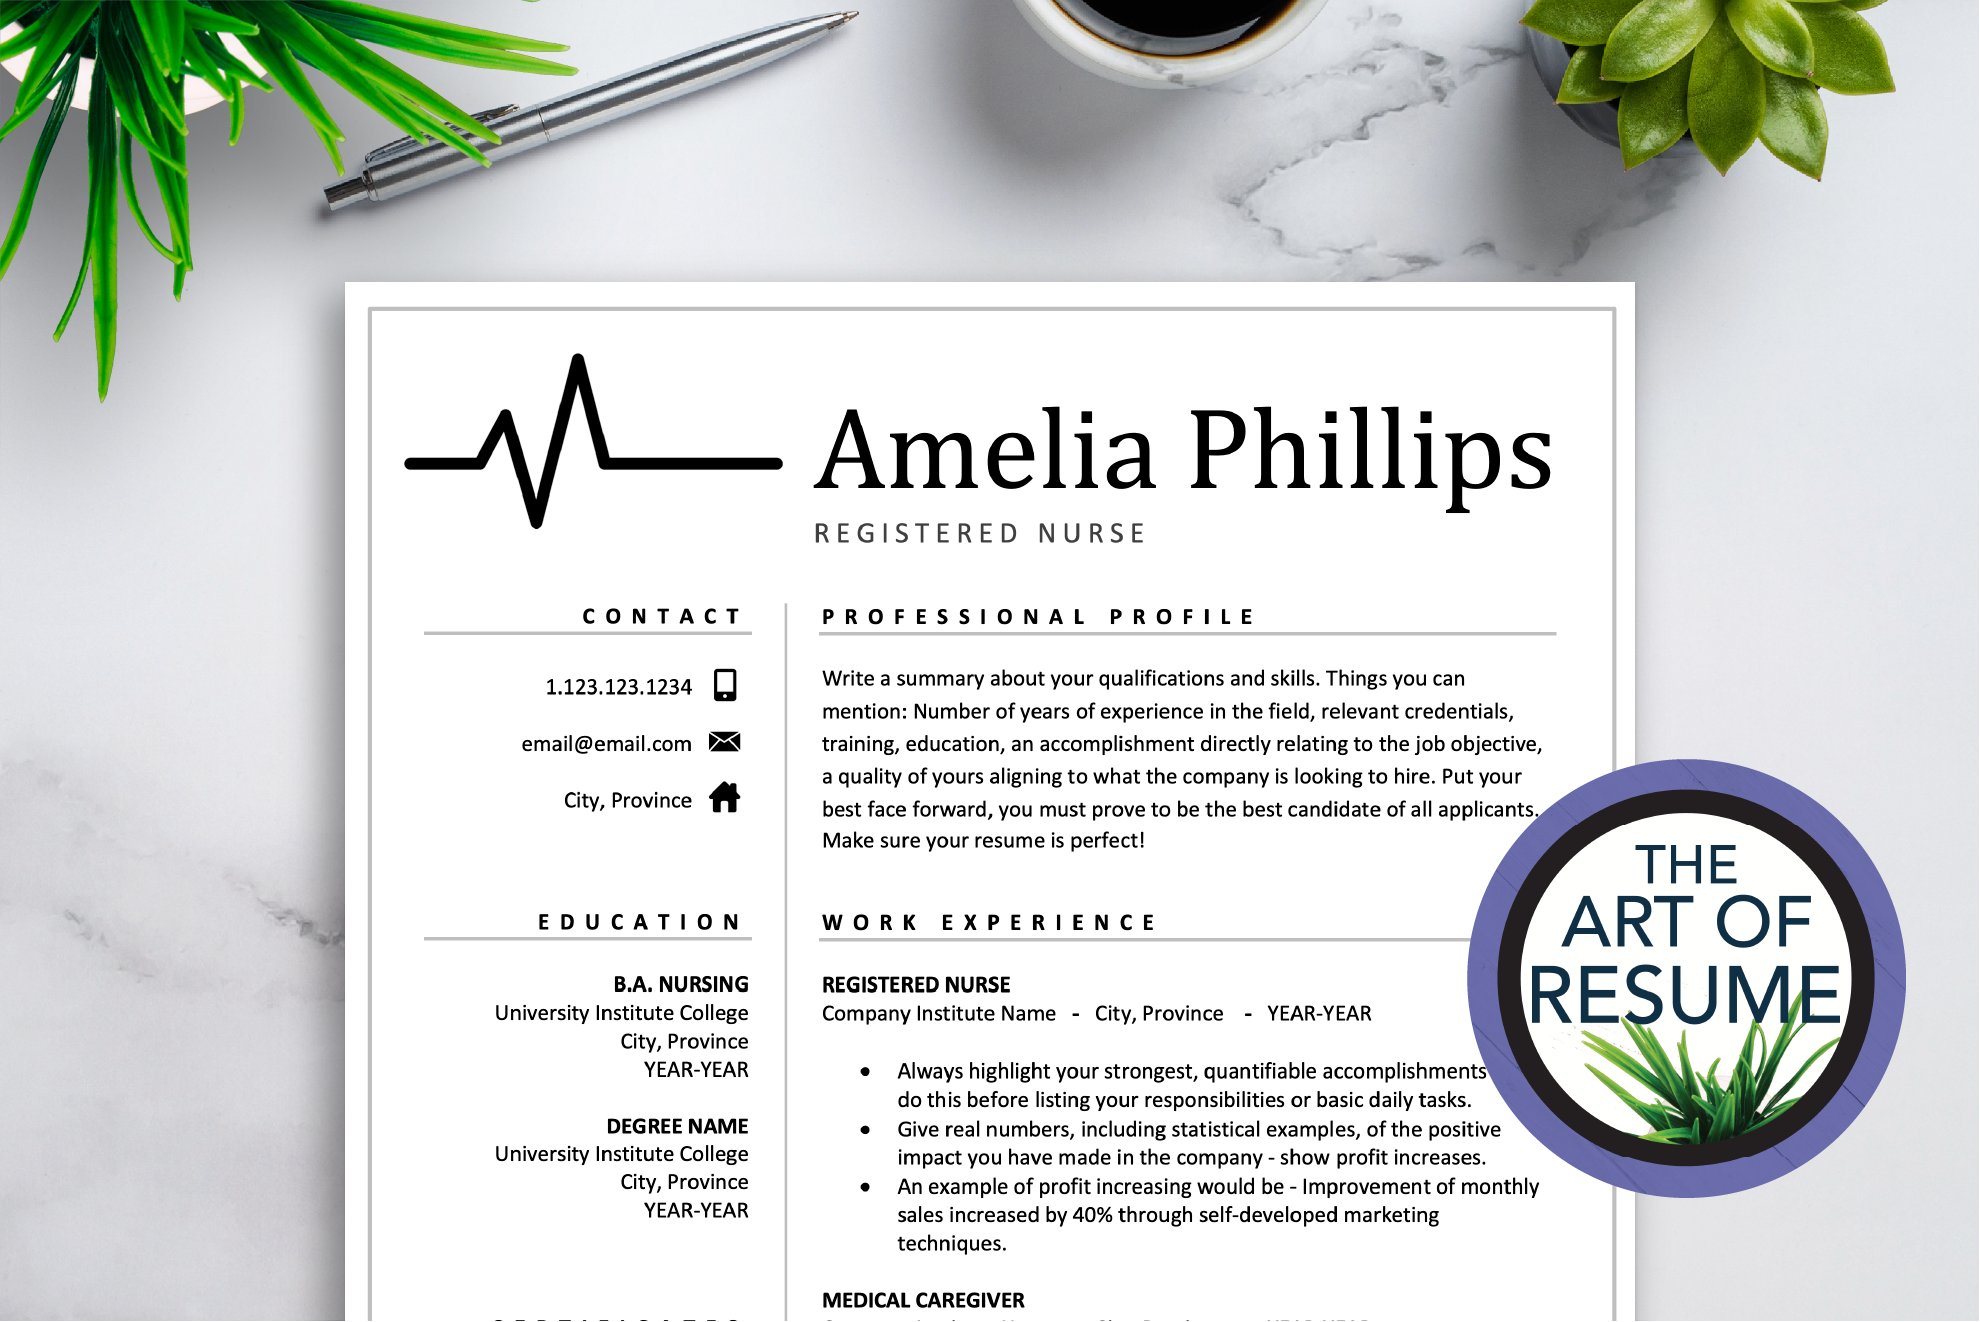 Professional resume with a green plant and a cup of coffee.